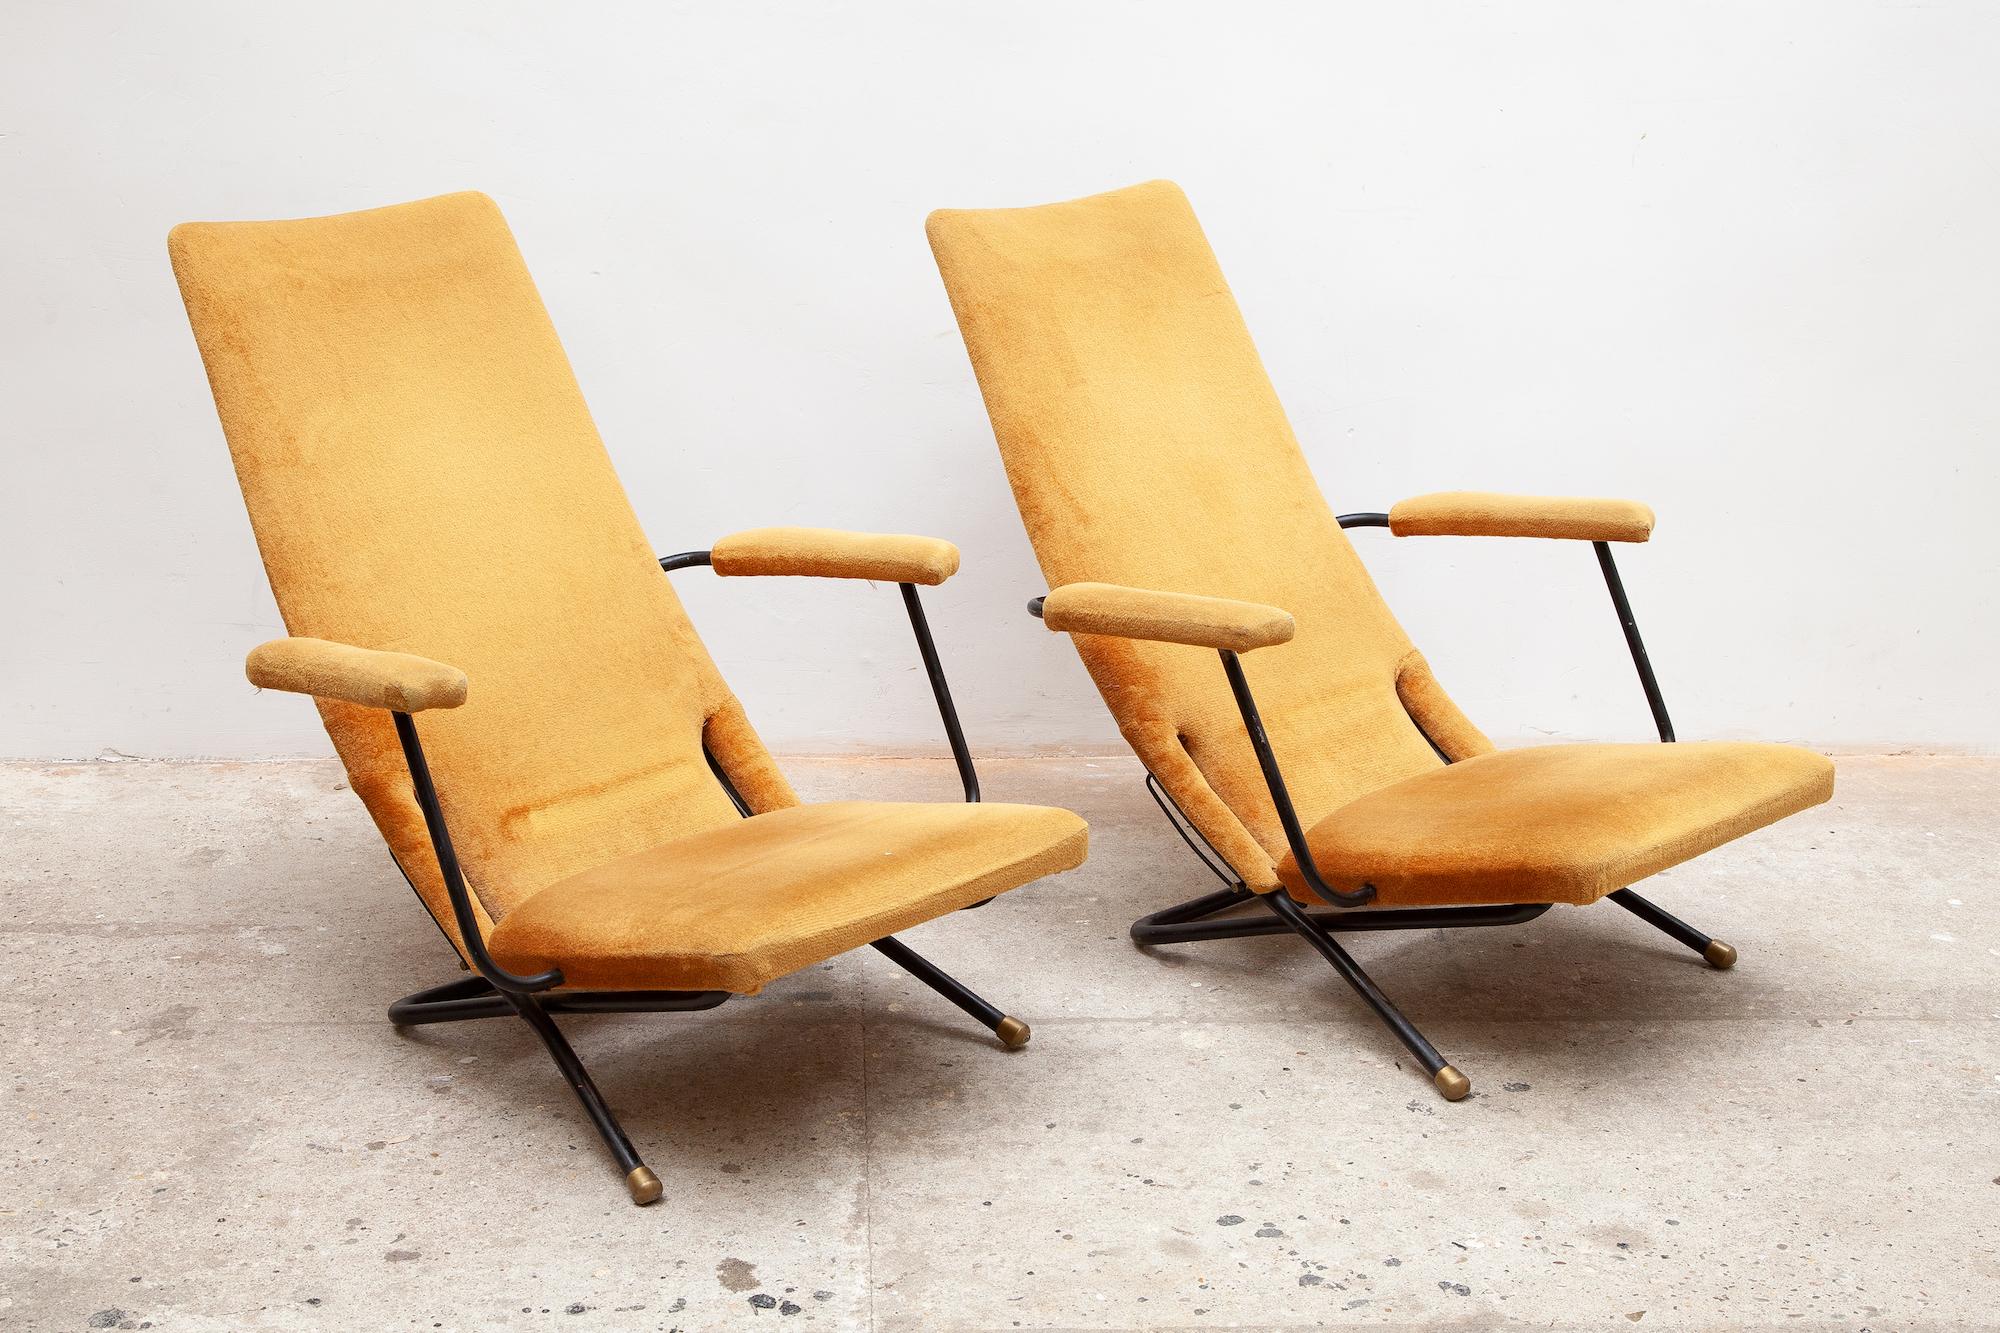 A pair of vintage midcentury lounge chairs. Tubular black frame and original velour yellow upholstery. Can be converted from an easy chair to a reclining seat in four positions. Recline mechanism works very well. Dimensions: 68 W x 102 H x 50 D cm.